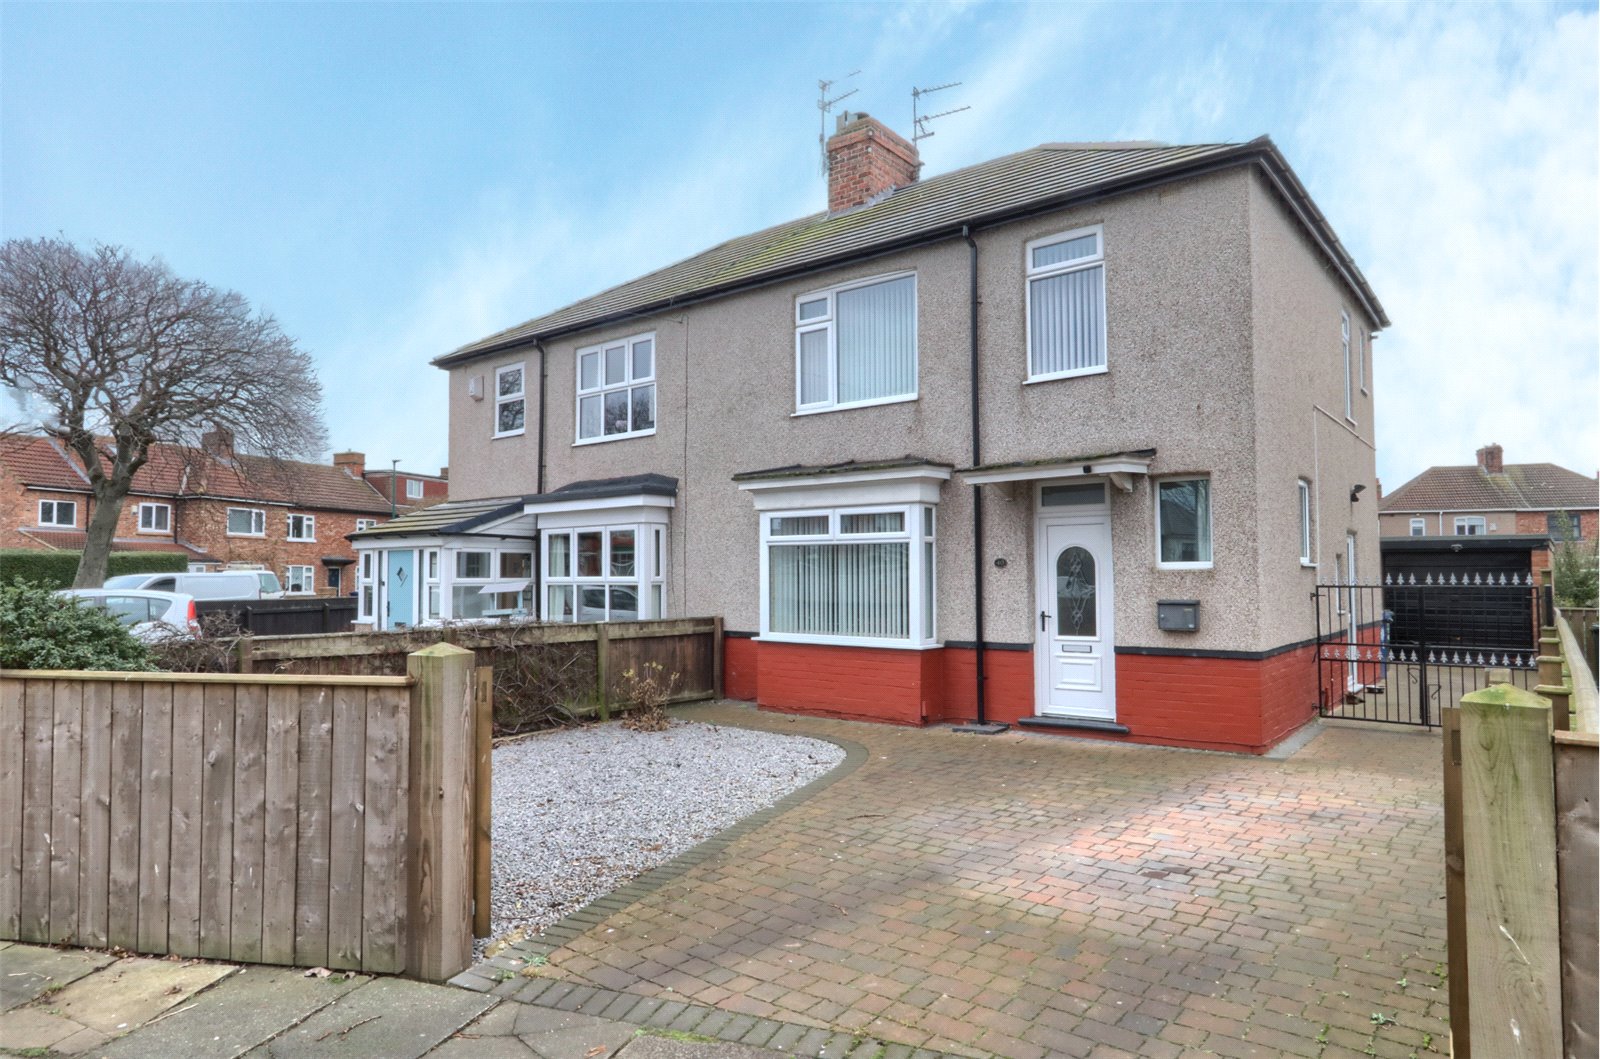 3 bed house for sale in Westfield Avenue, Redcar - Property Image 1